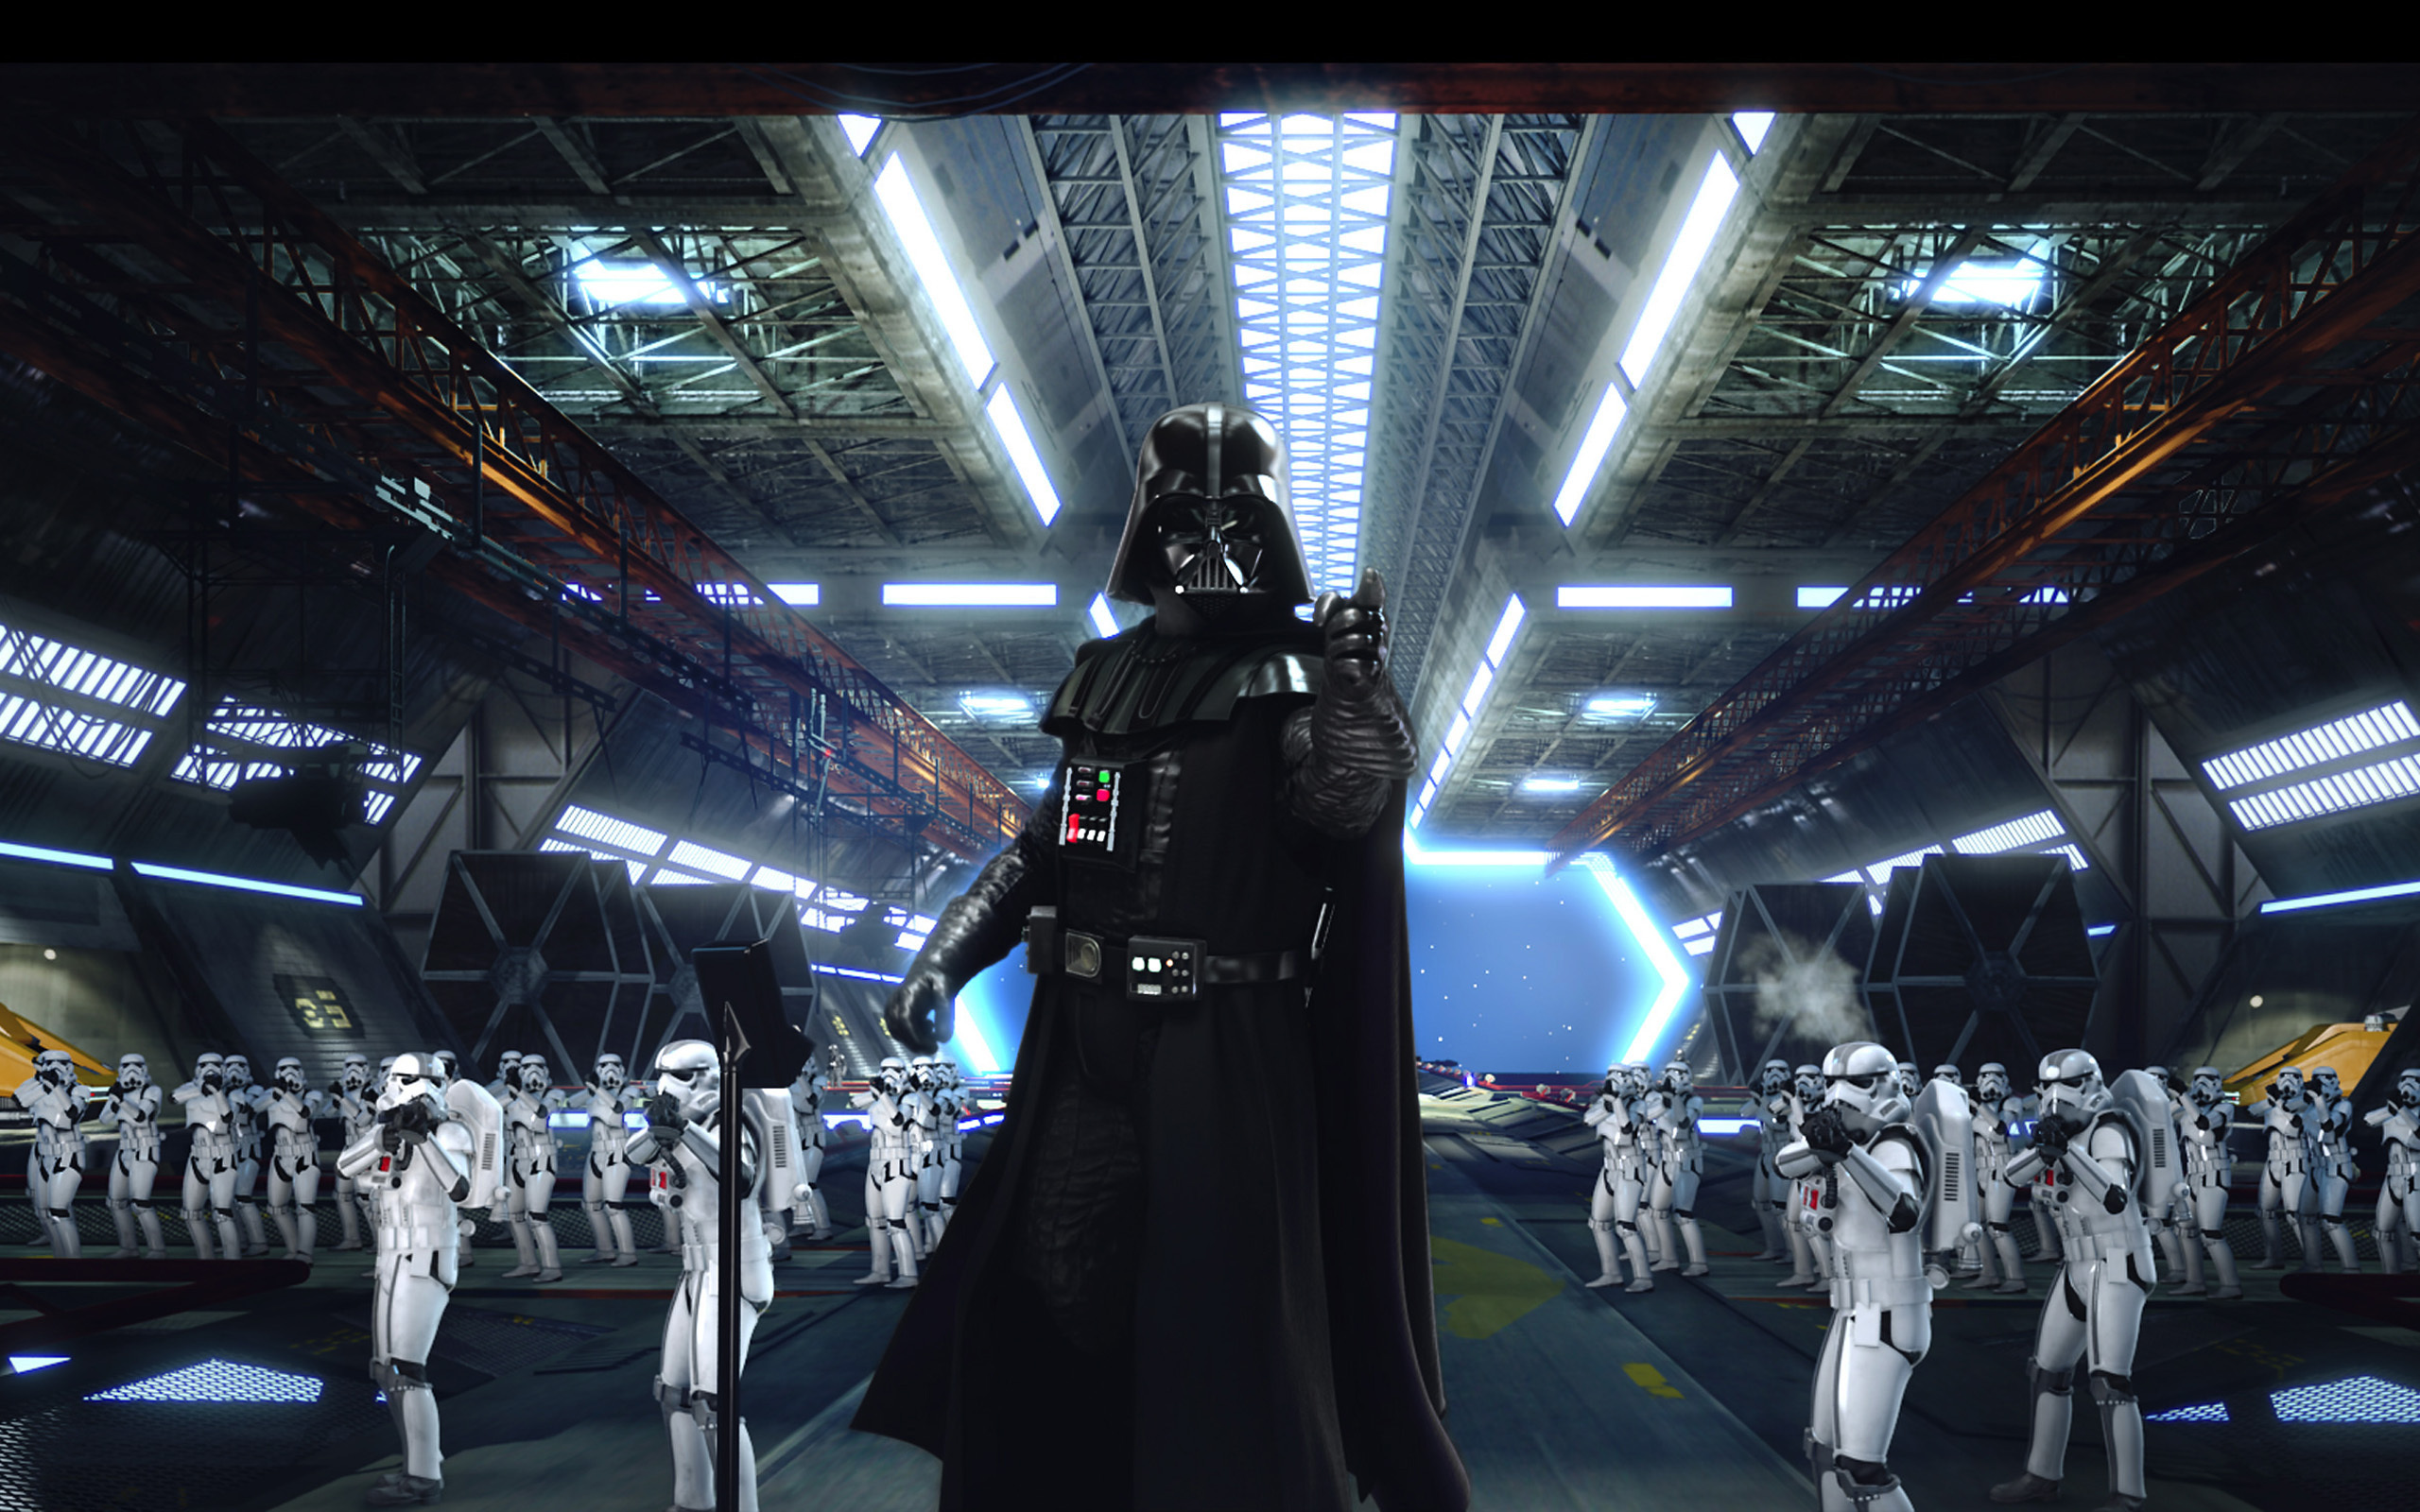  darth vader wallpapers download backgrounds computer hd wallpapers hd